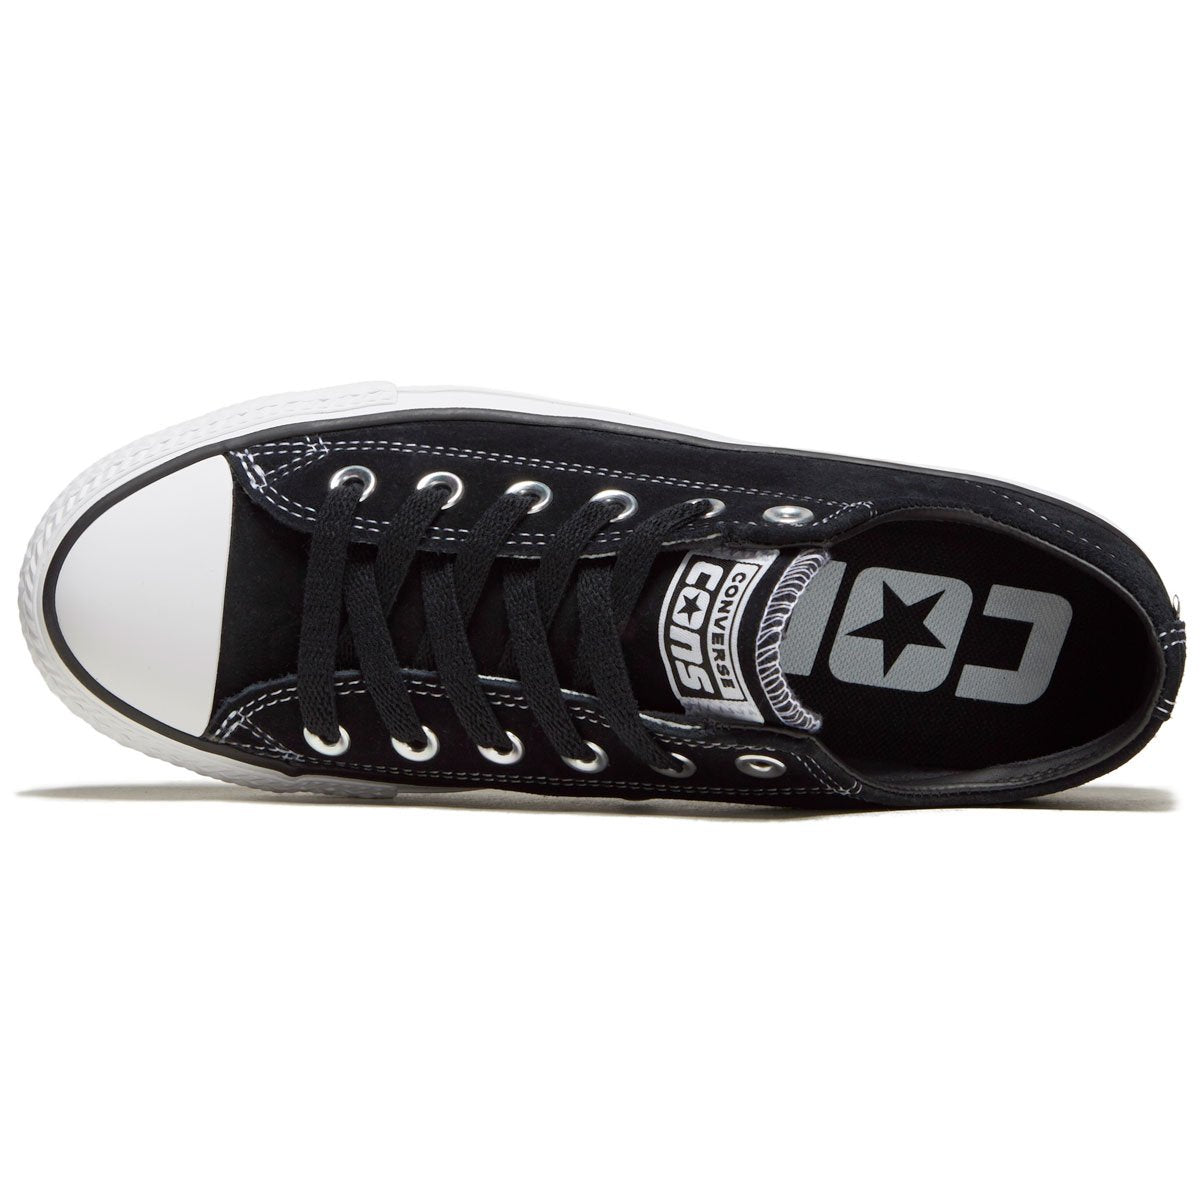 Converse Chuck Taylor All Star Pro Suede Ox Shoes - Black/Black/White image 3